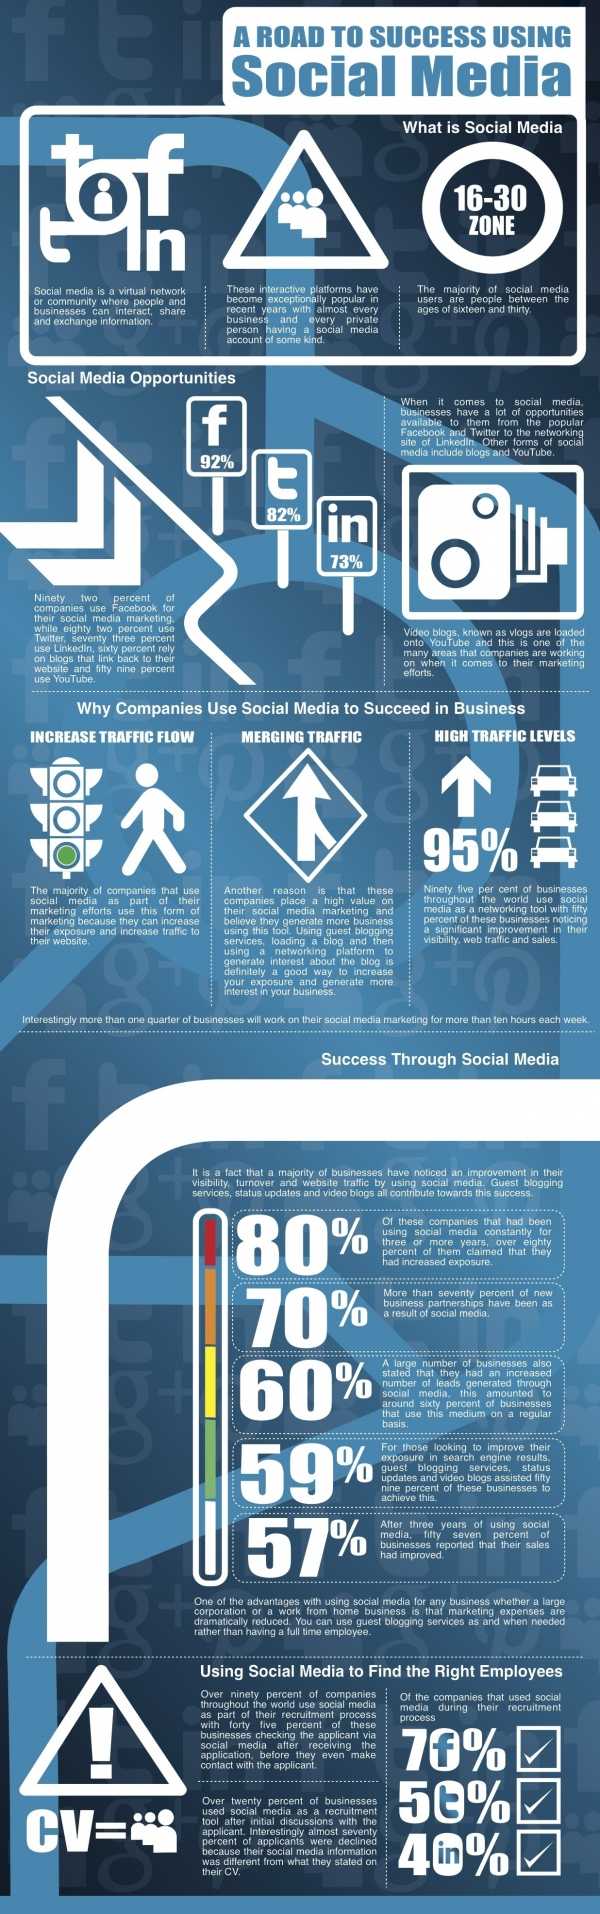 Social Media - The Road to Success - Infographic